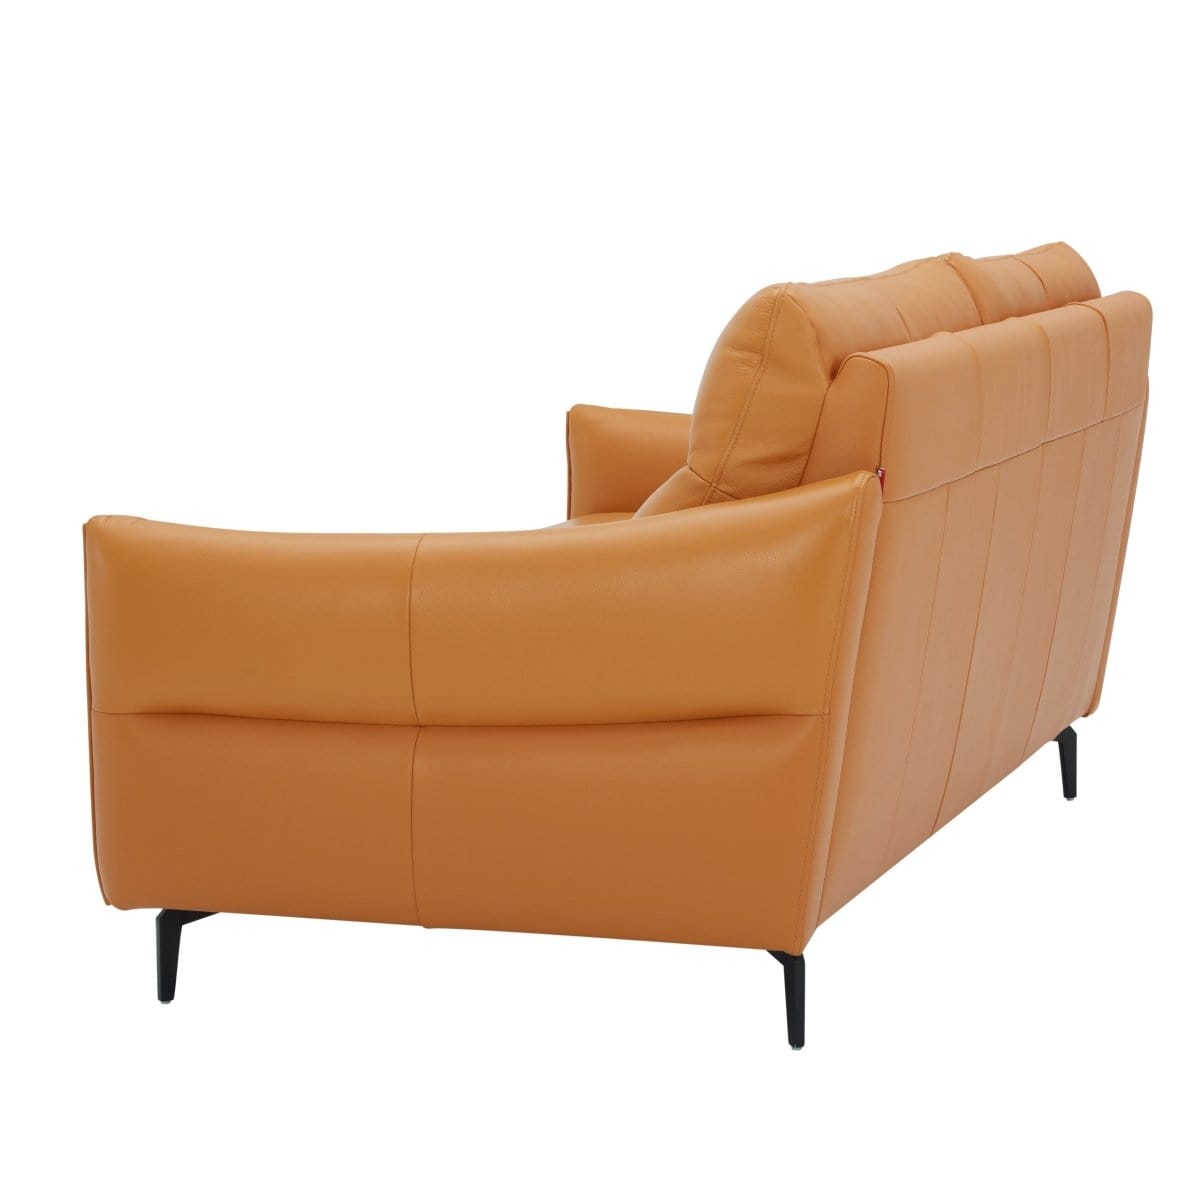 #1   KUKA KT.031 Top-Grain 3-Seater Leather Sofa (Col: M5658) picket and rail